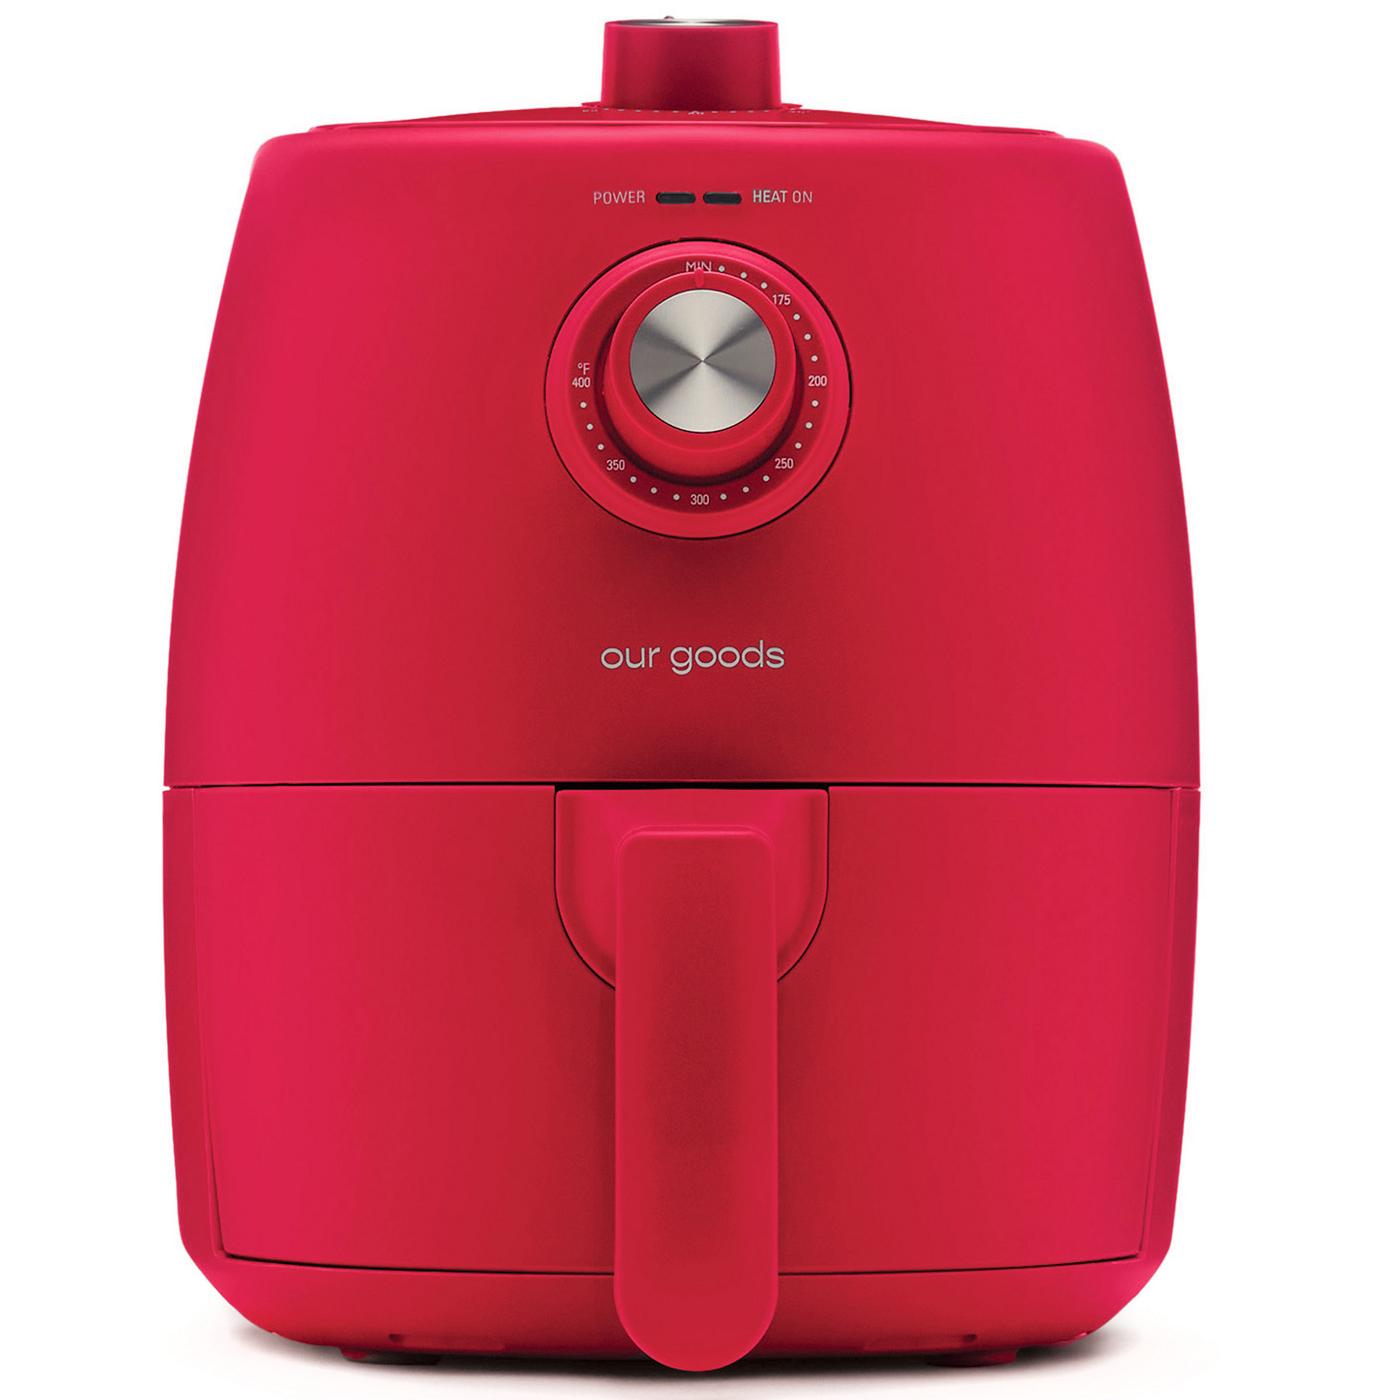 our goods Air Fryer - Scarlet Red; image 1 of 3